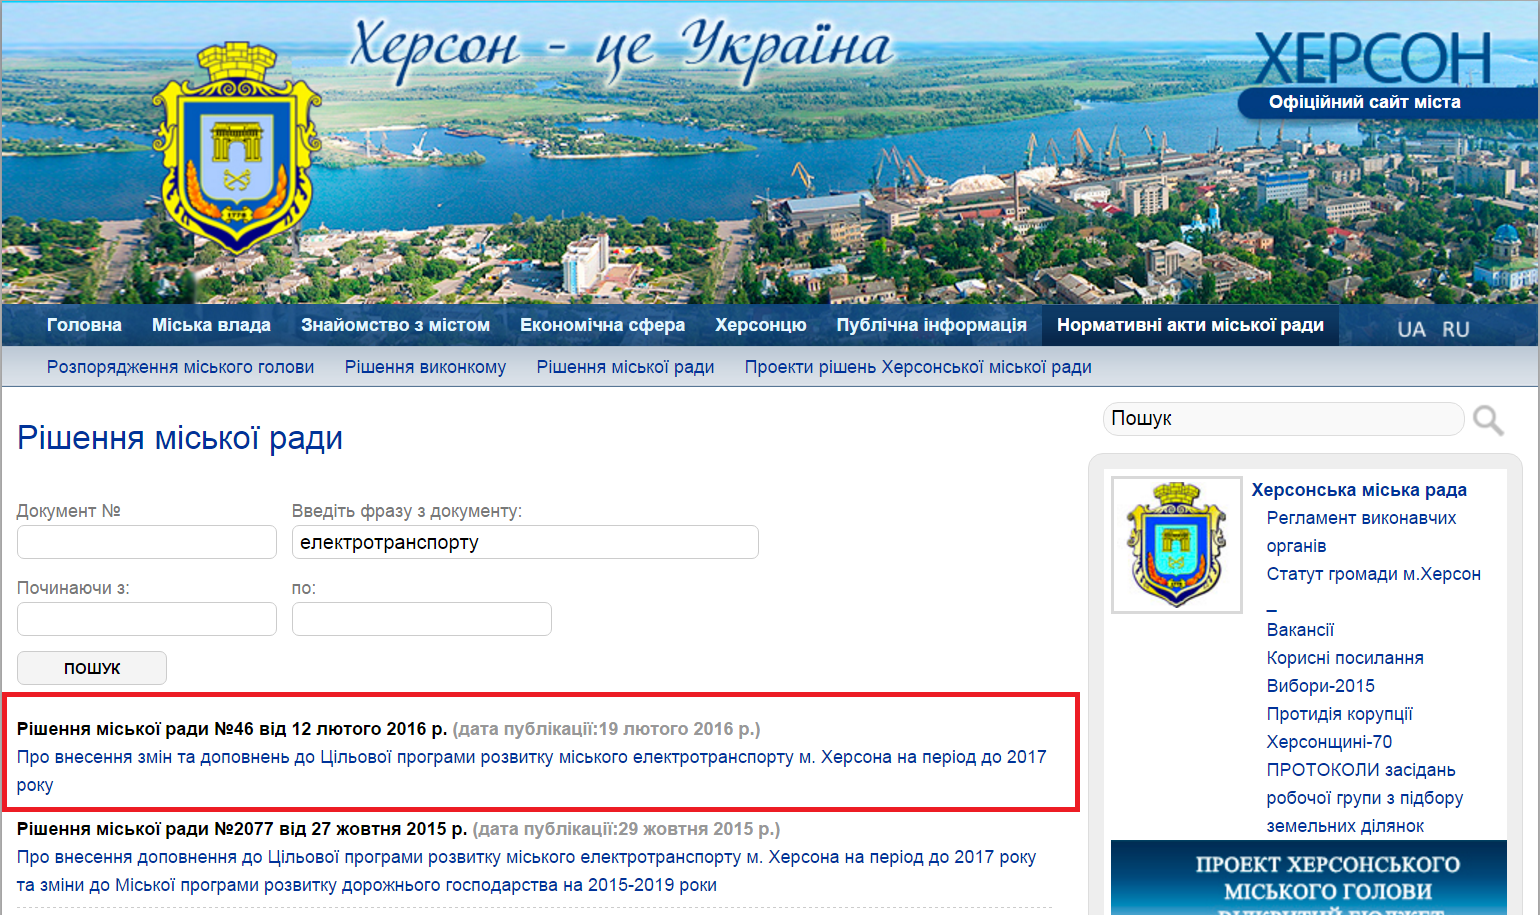 http://www.city.kherson.ua/act_search/3?number=&text=%D0%B5%D0%BB%D0%B5%D0%BA%D1%82%D1%80%D0%BE%D1%82%D1%80%D0%B0%D0%BD%D1%81%D0%BF%D0%BE%D1%80%D1%82%D1%83&date_from=&date_to=&search=1